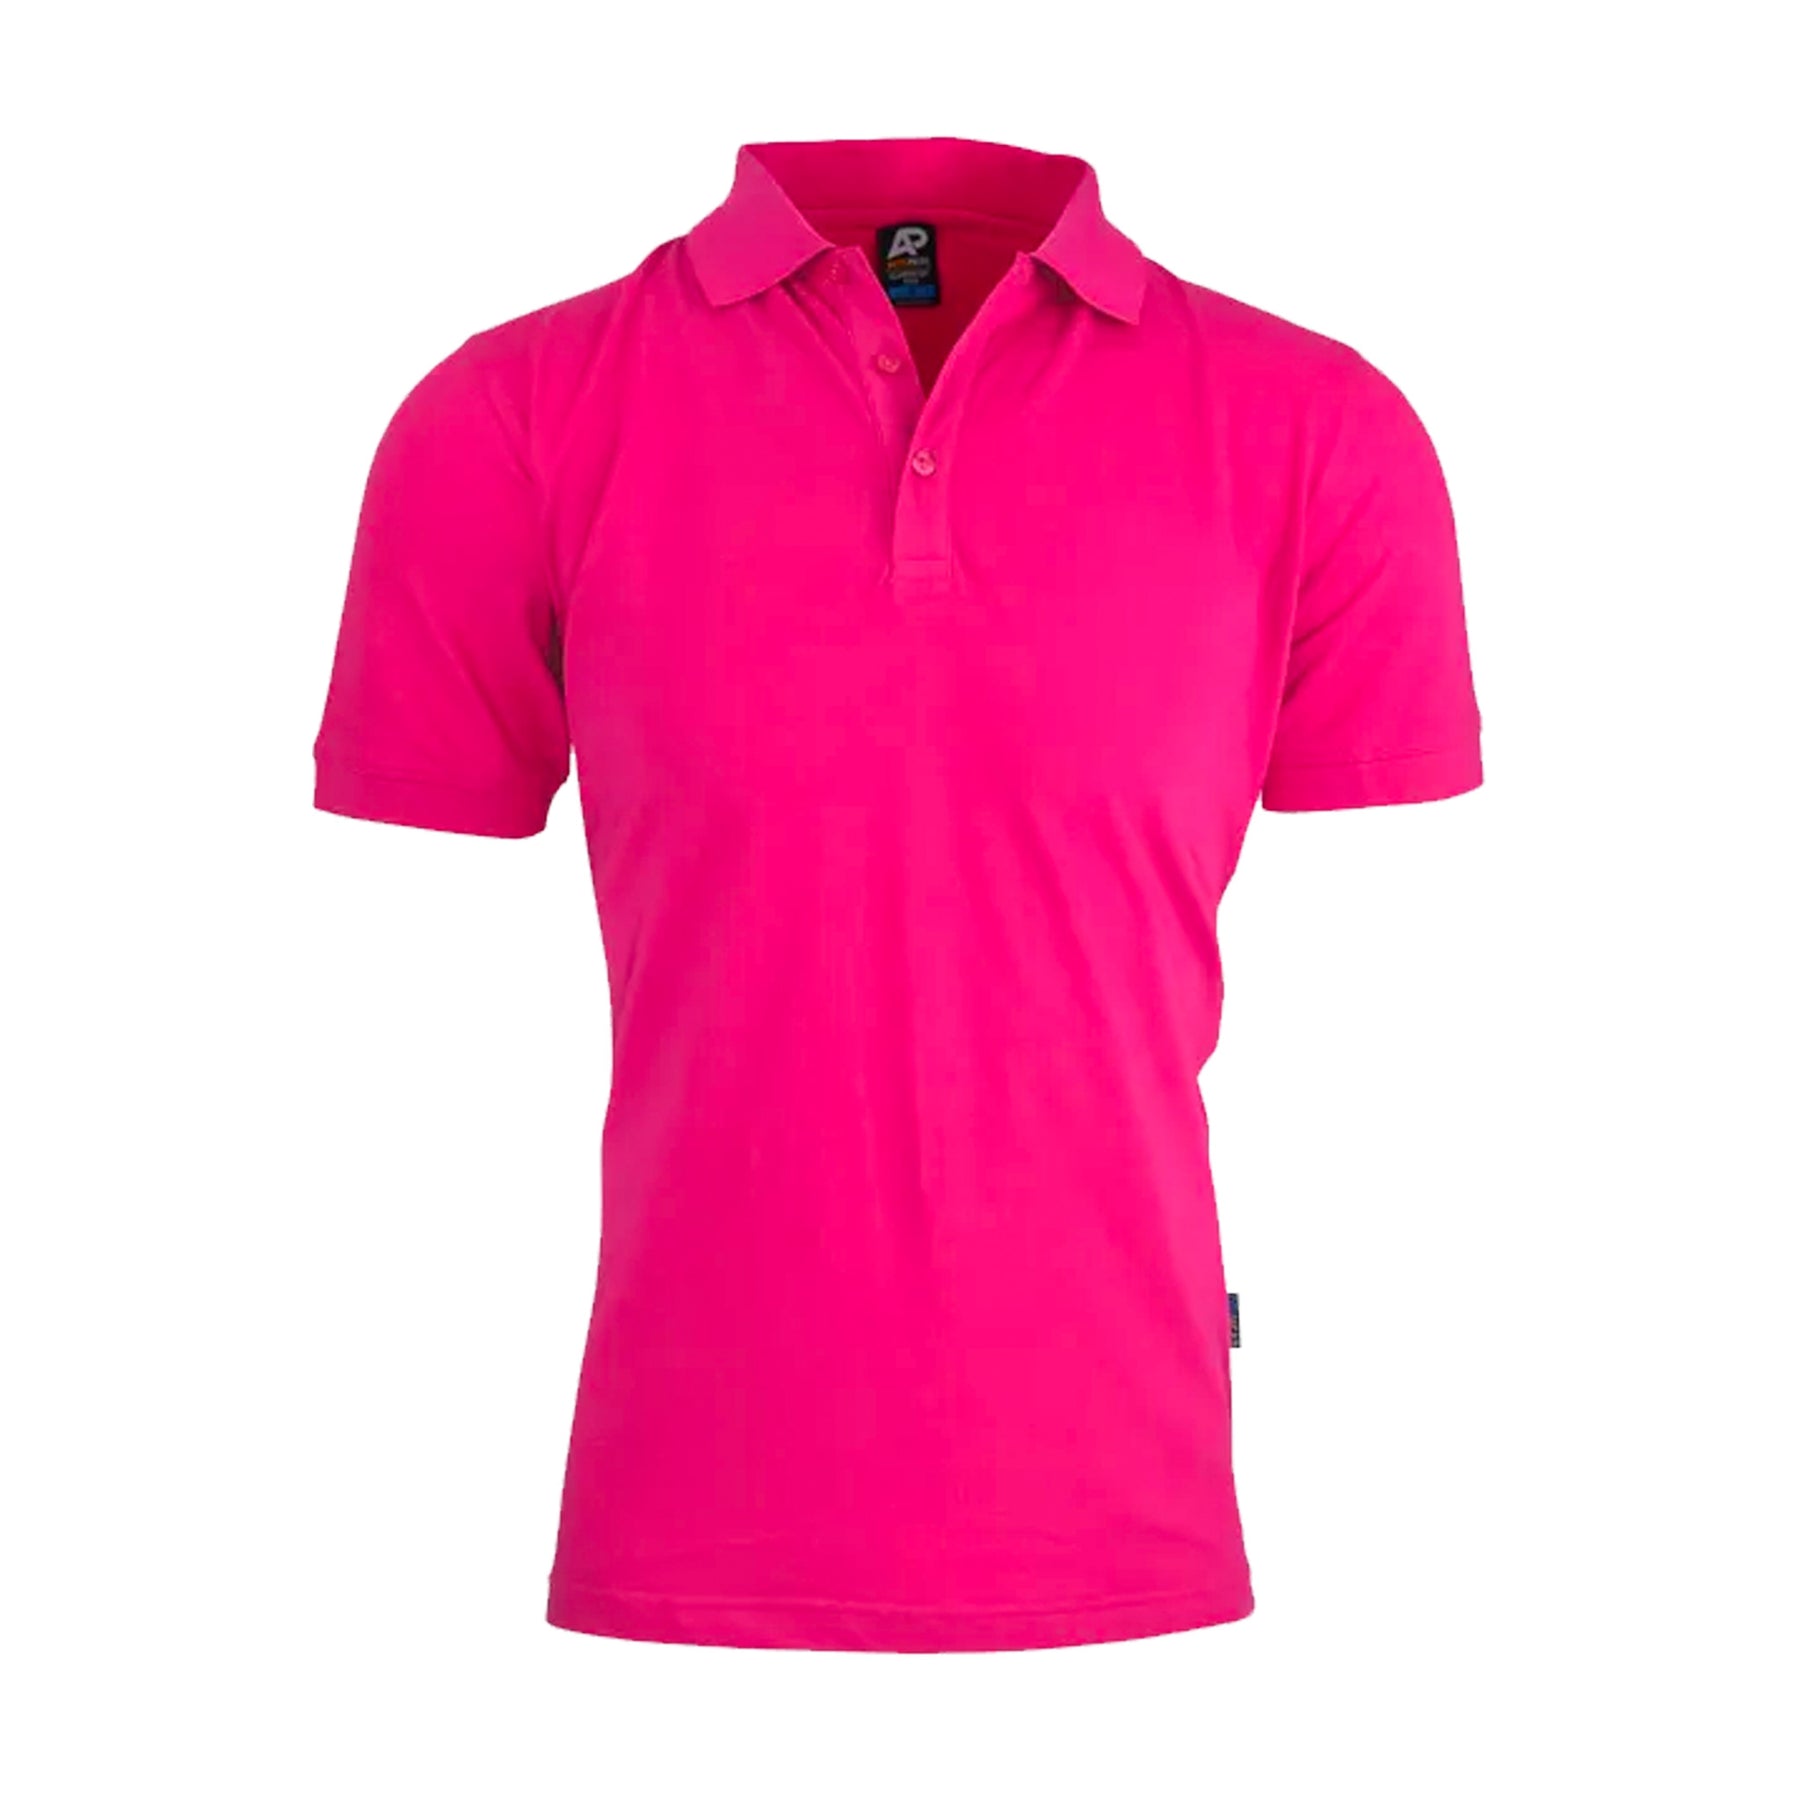 aussie pacific claremont mens polo in pink